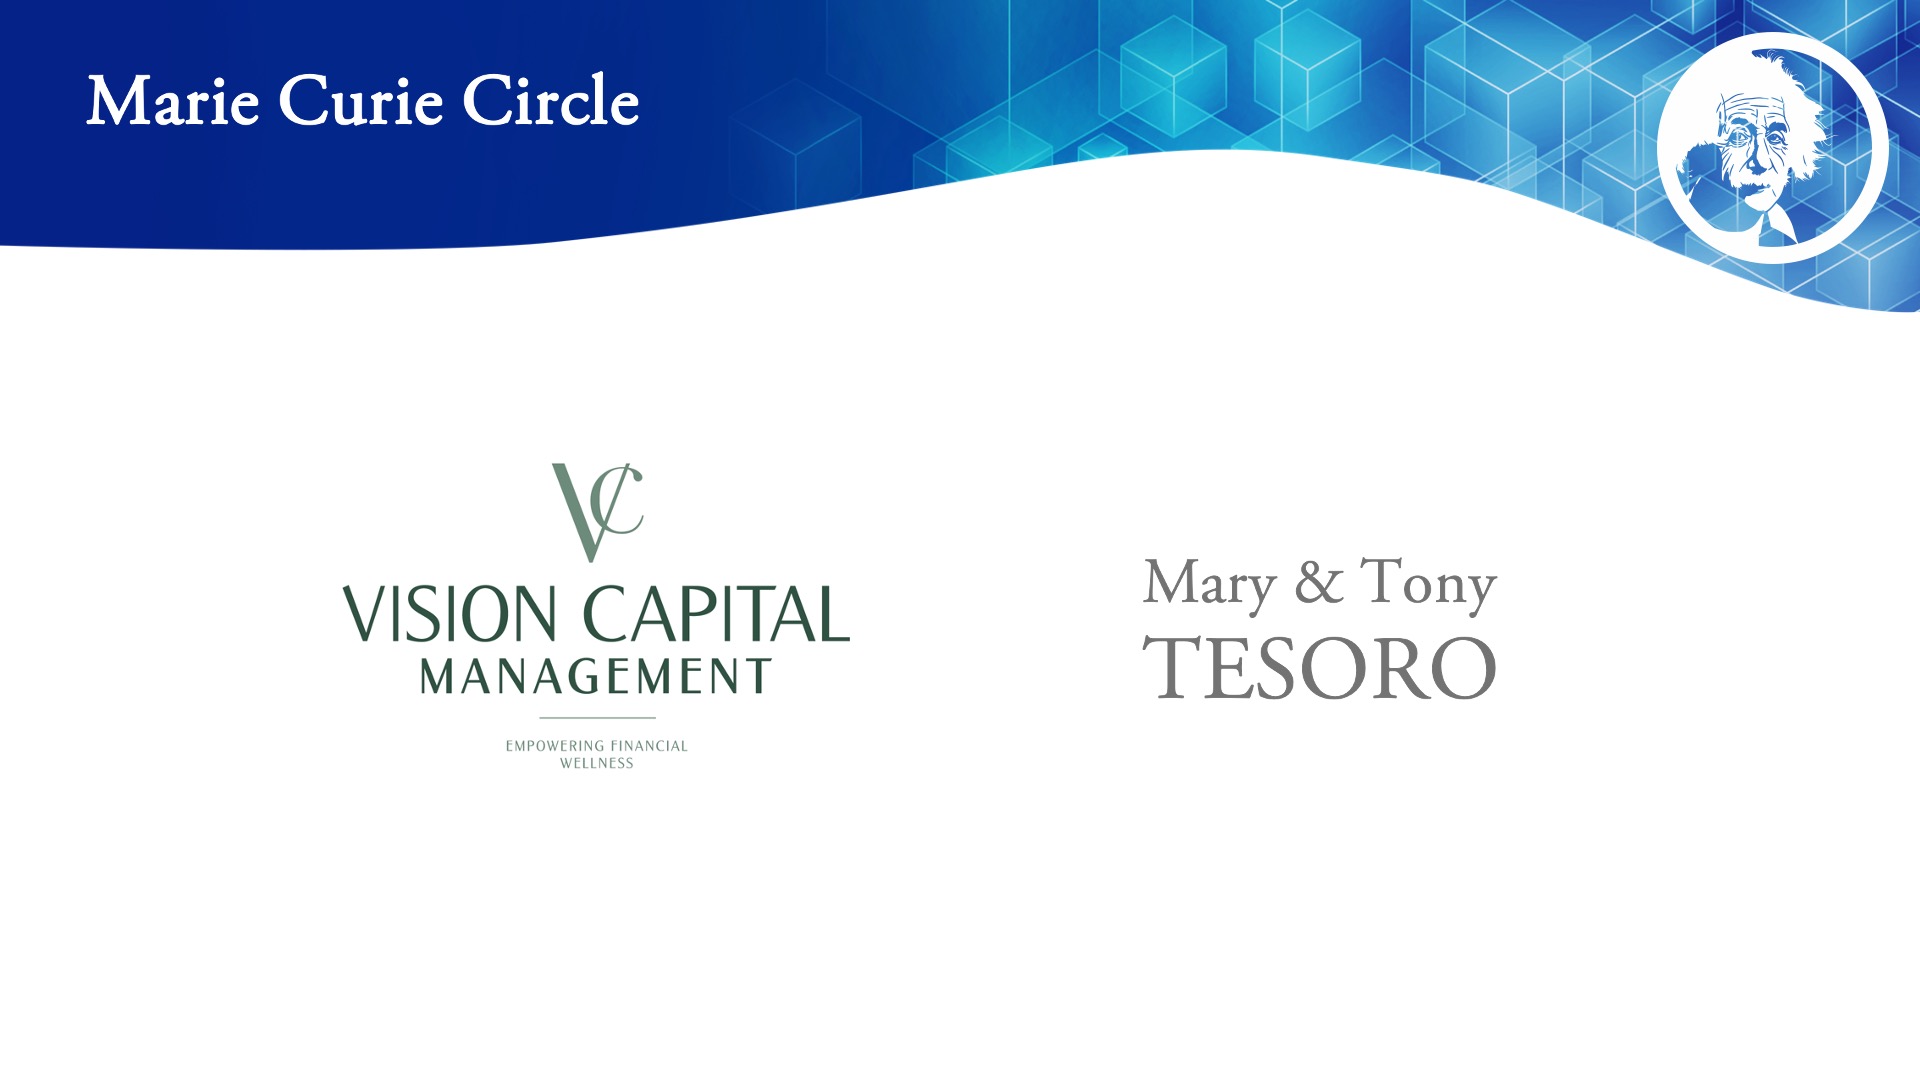 Marie Curie Circle Sponsors: Vision Capital Management, Mary & Tony Tesoro